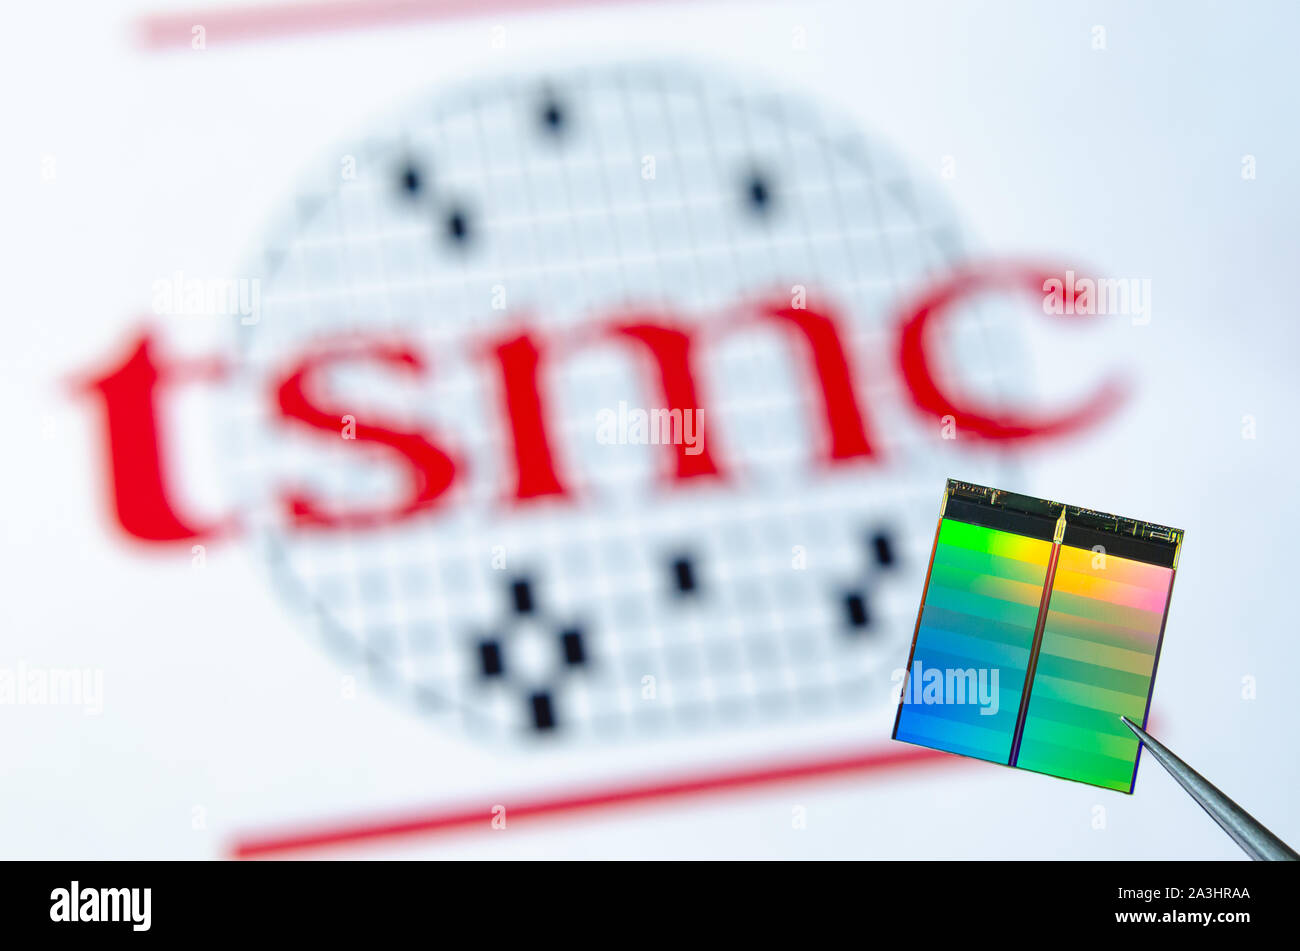 Close up photo of microchip (aka semiconductor chip, semiconductor device, Integrated Circuit) hold in tweezers with TSMC logo on a background. Stock Photo